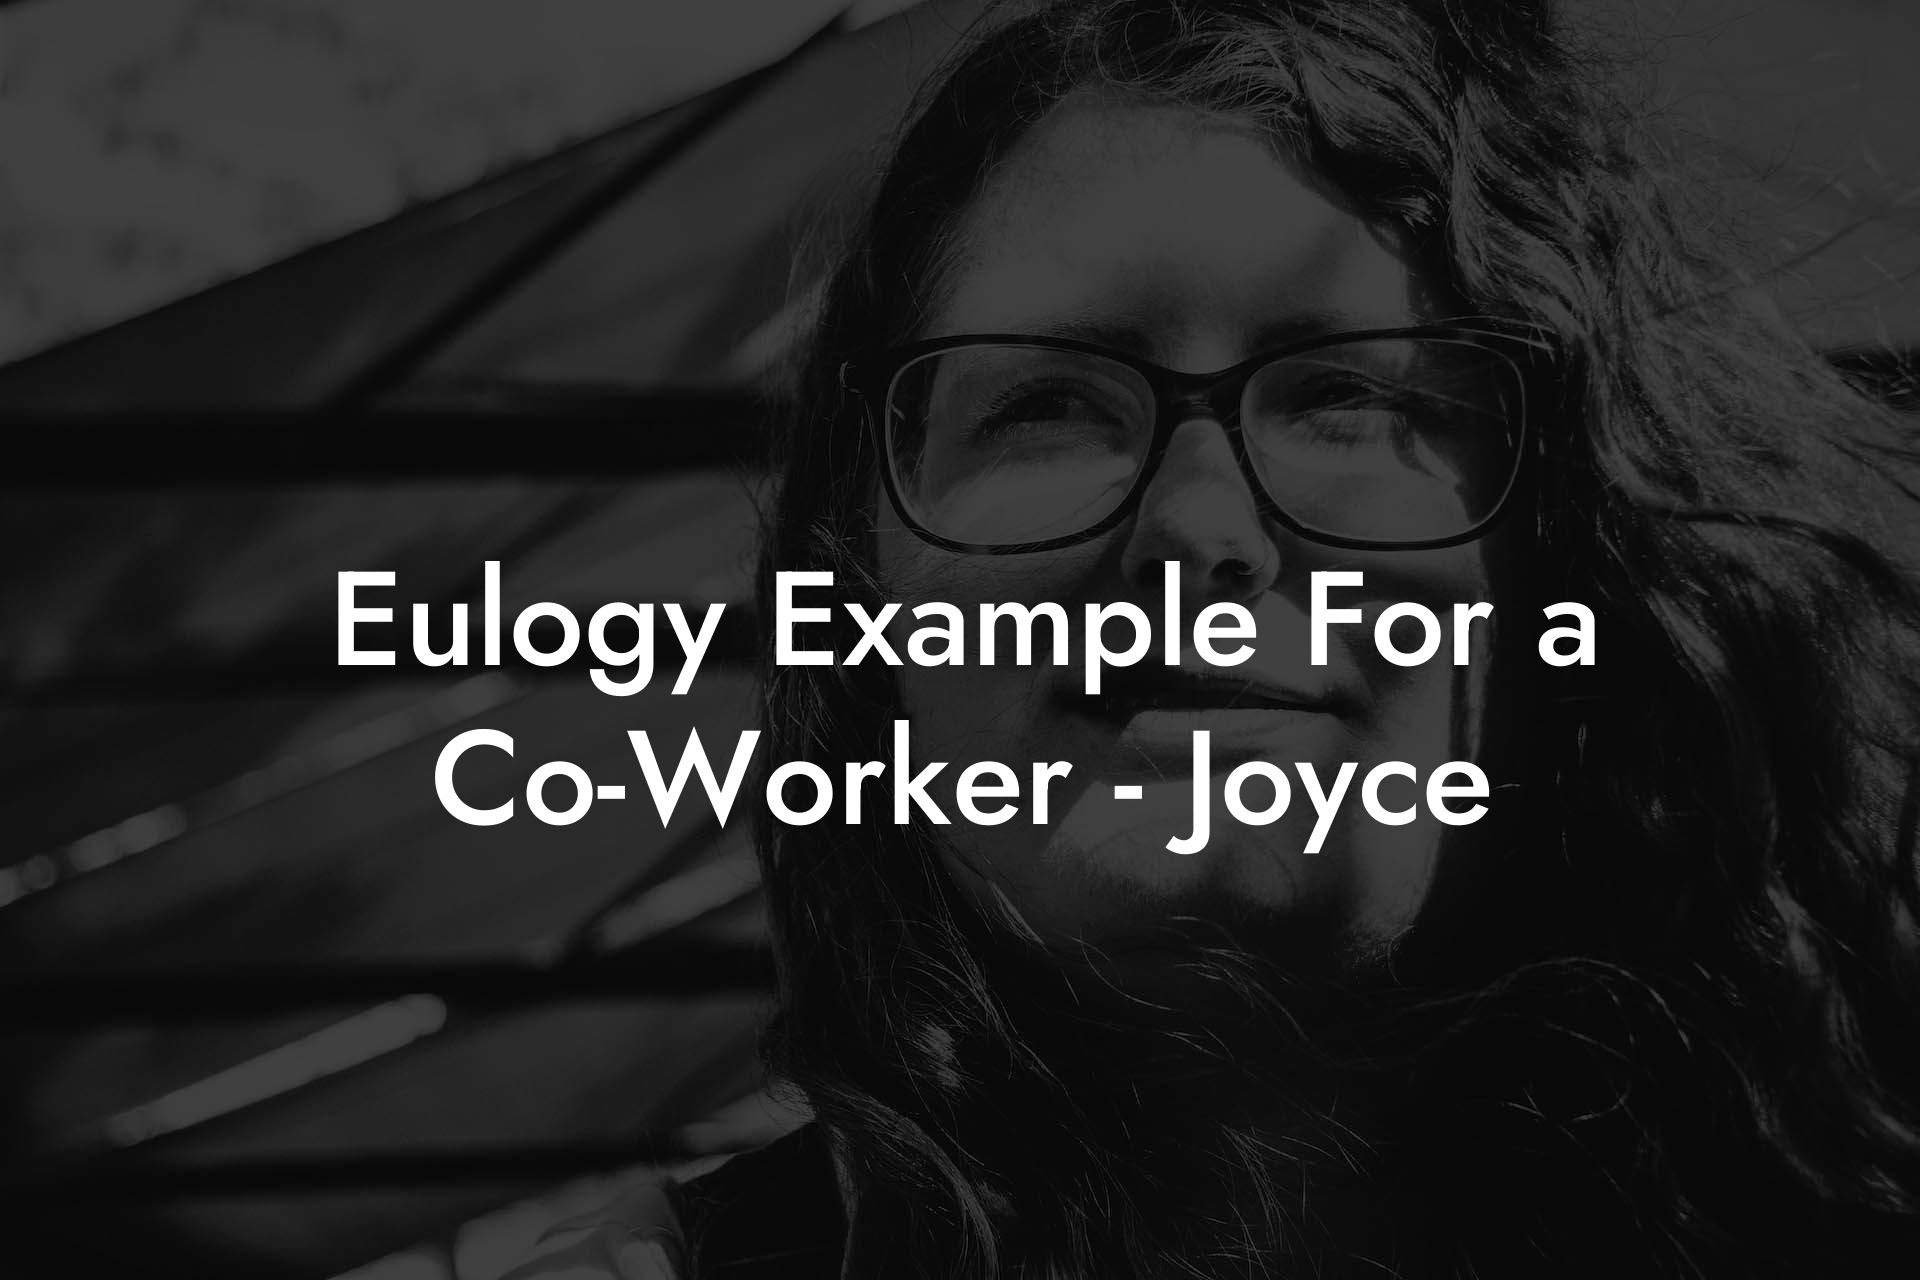 Eulogy Example For a Co-Worker - Joyce